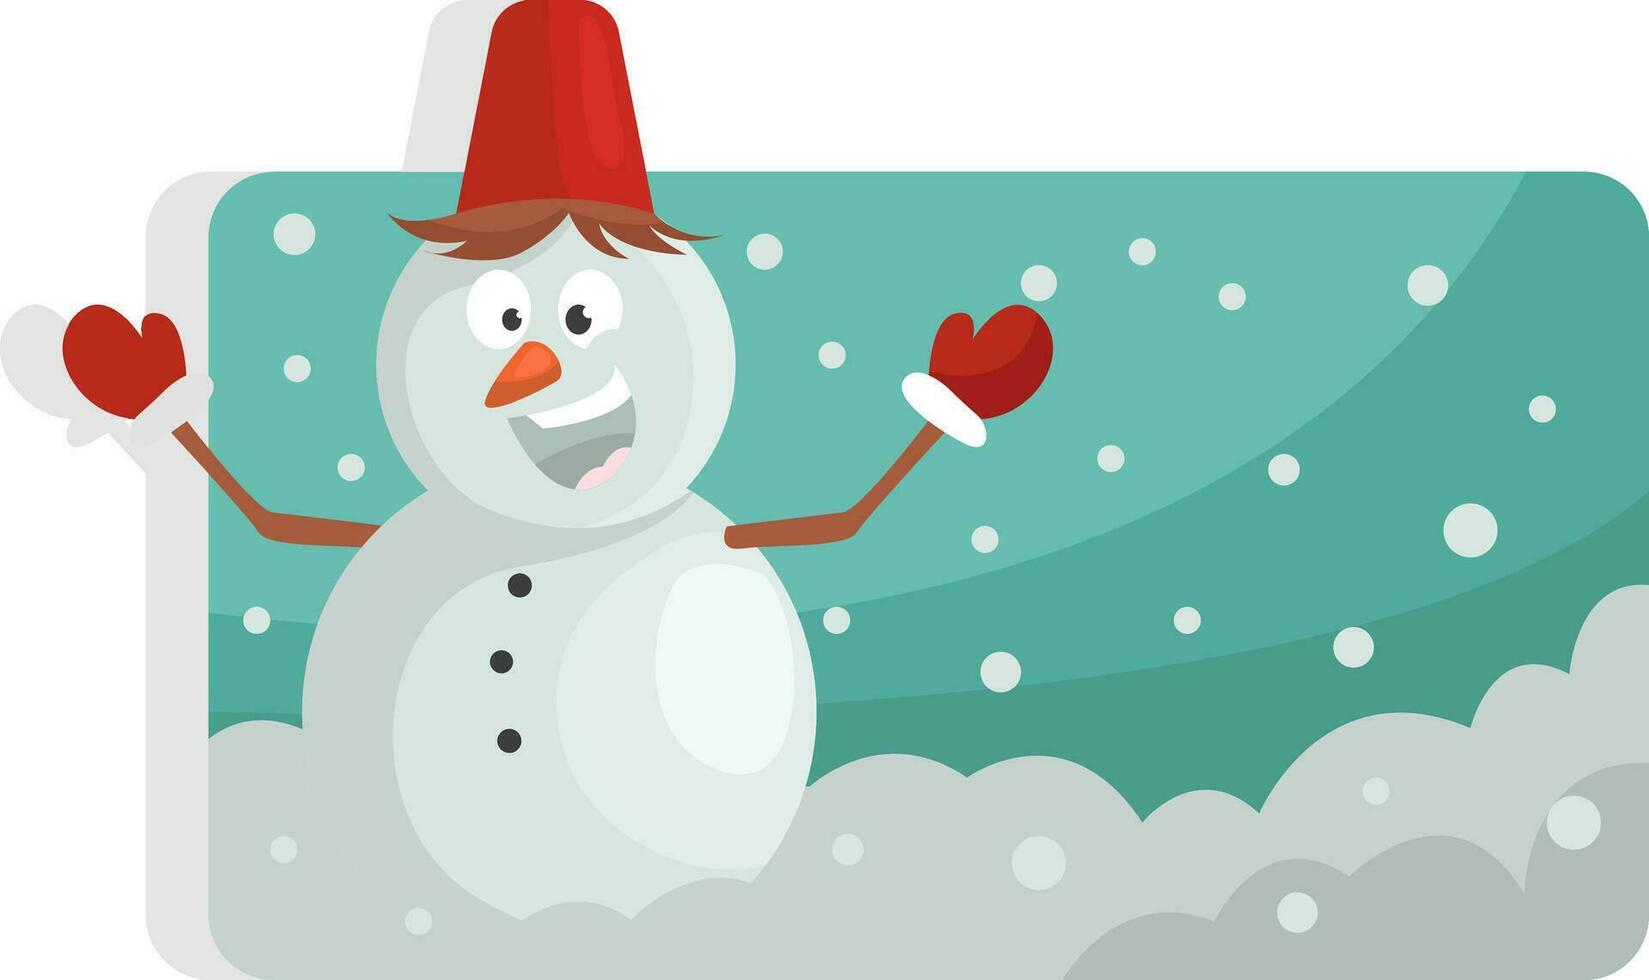 Snowman with bucket, illustration, vector on a white background.